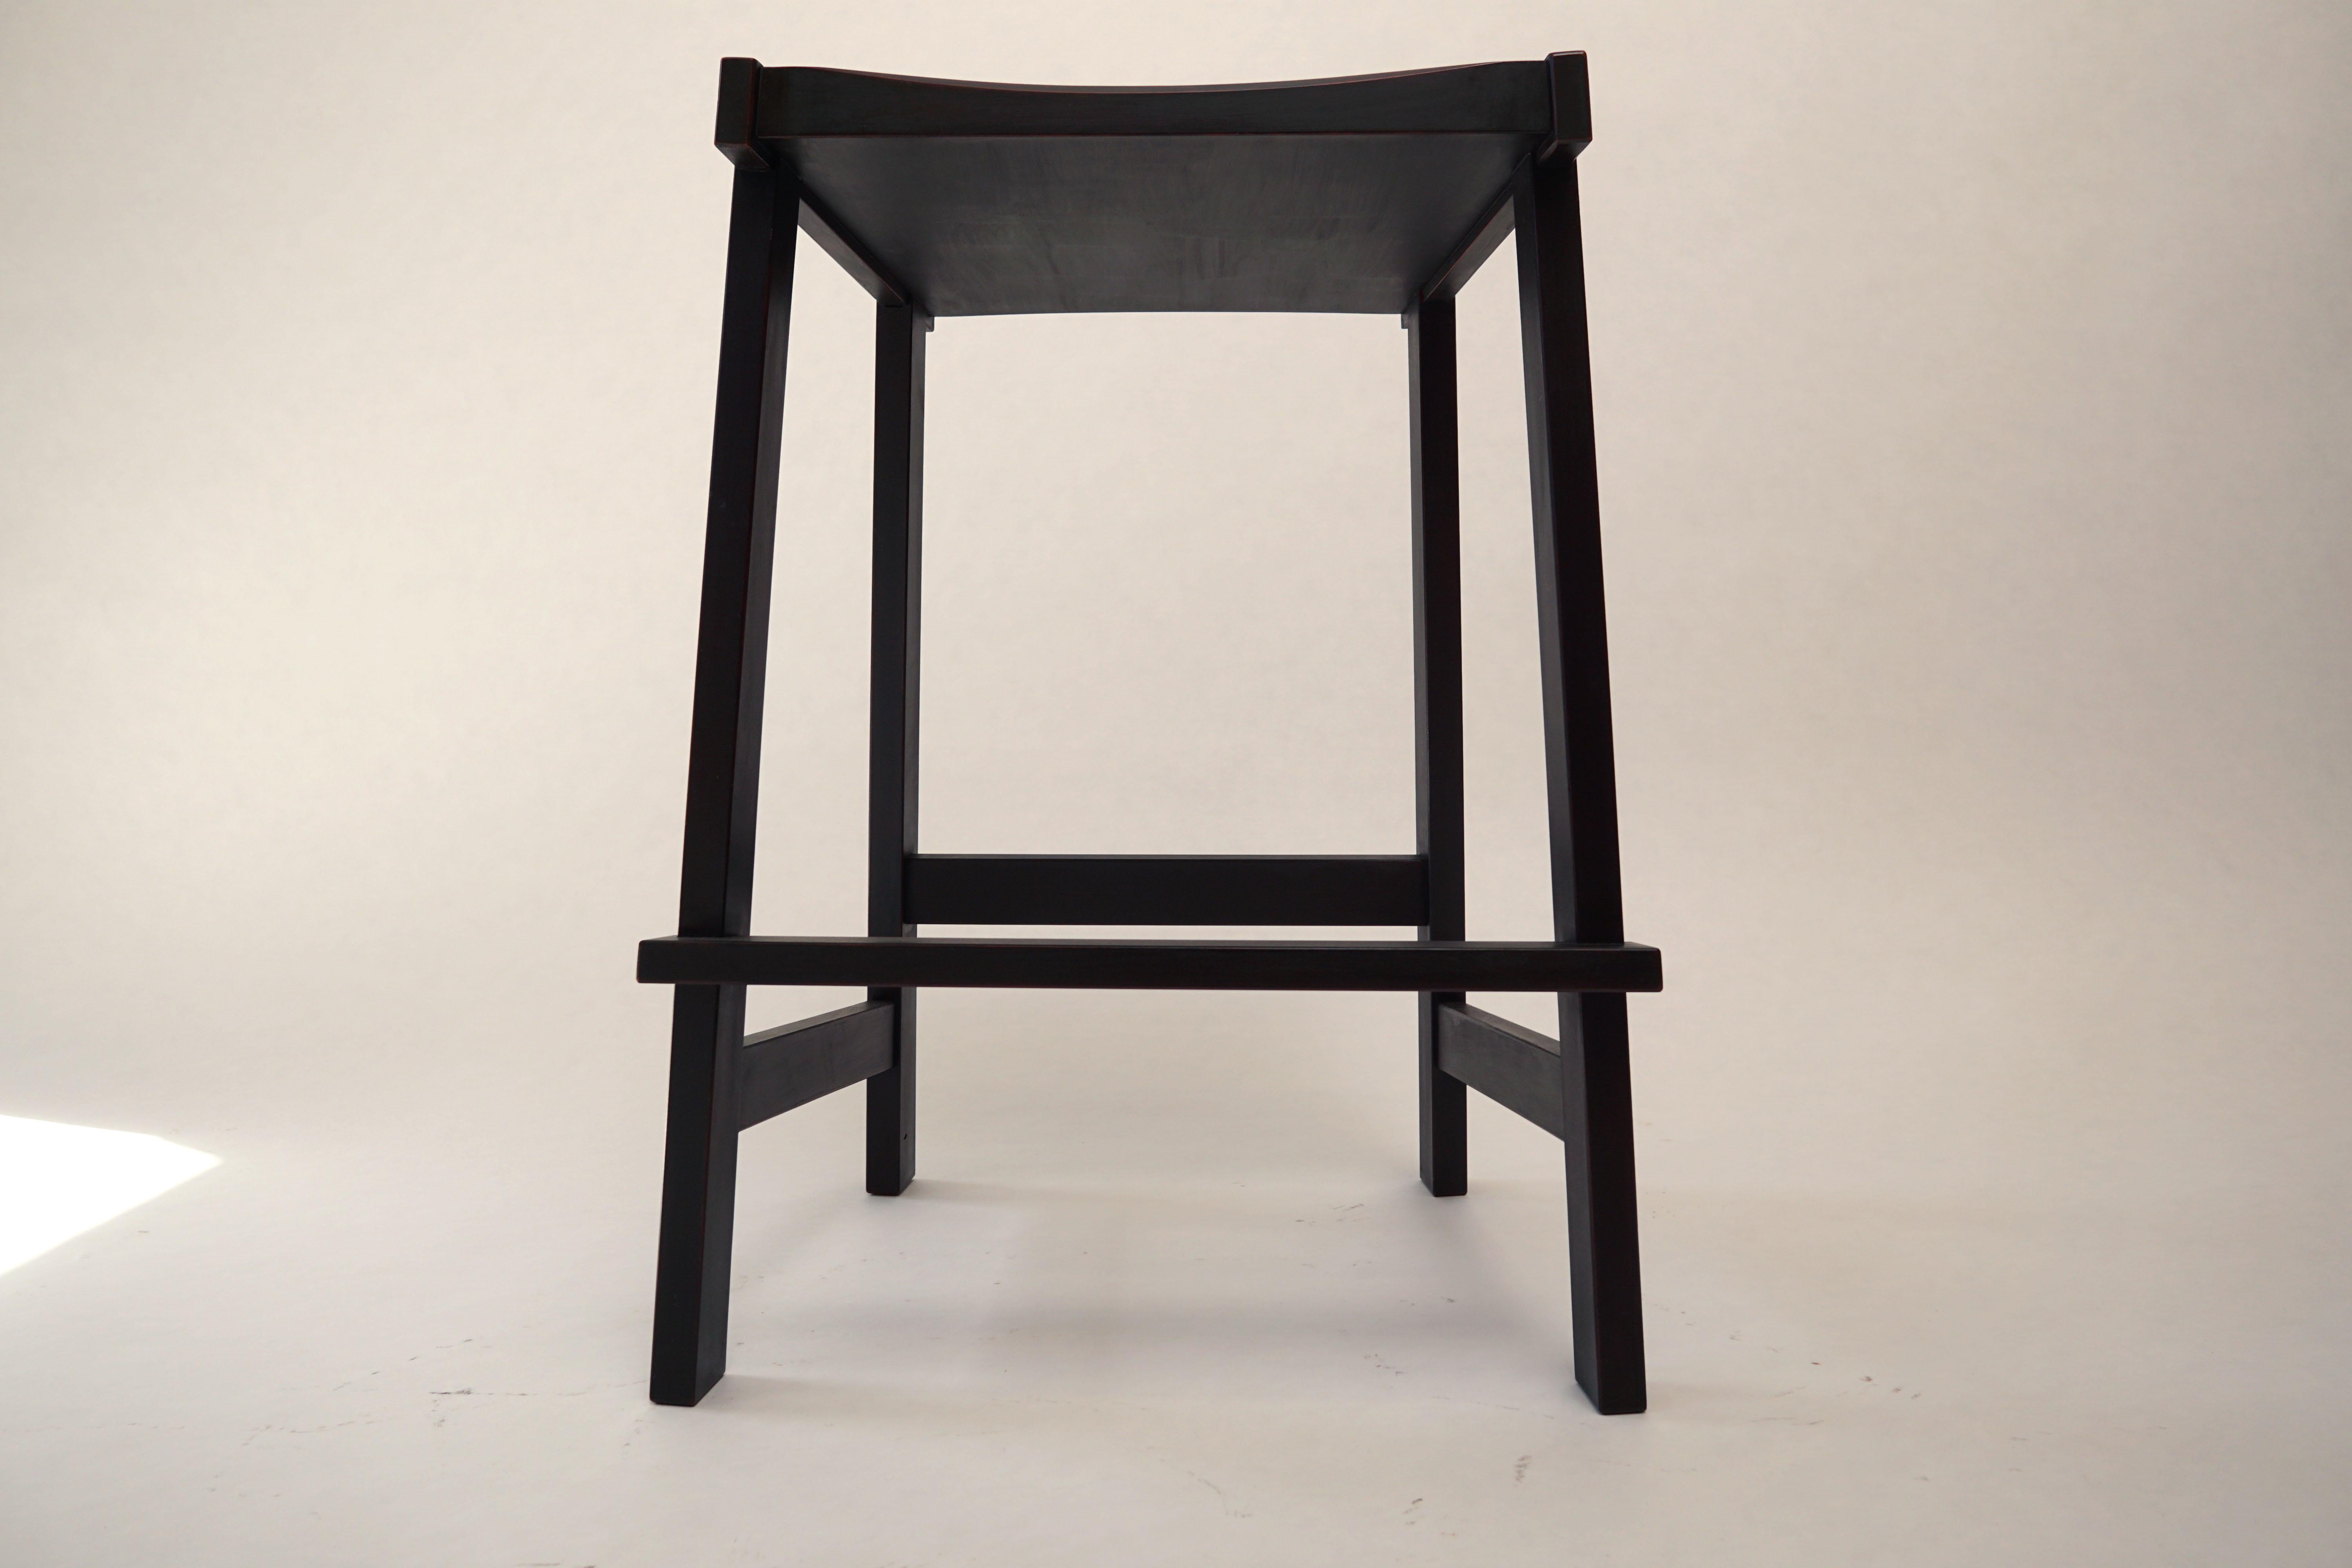 Poplar Montrose Stool, Black on Red Milkpaint, Exposed Joinery with a Hand Carved Seat For Sale